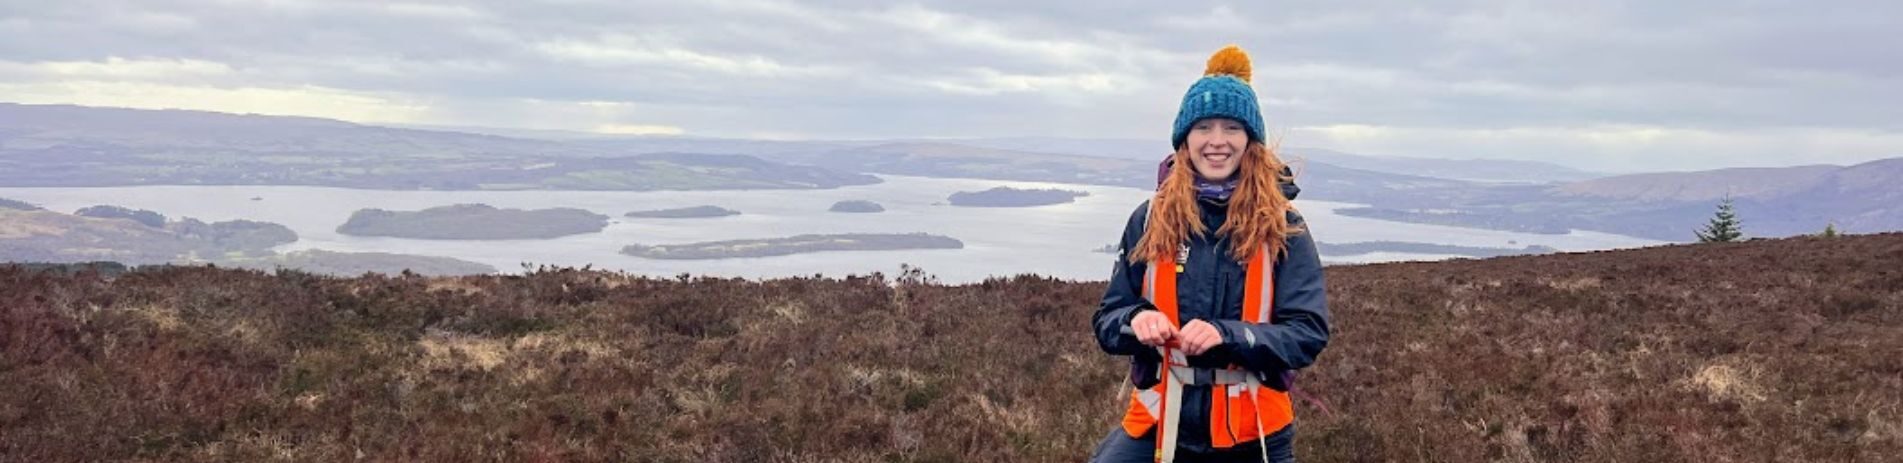 National Park staff member standing in area of peatland with Loch Lomond and islands visible in the background.